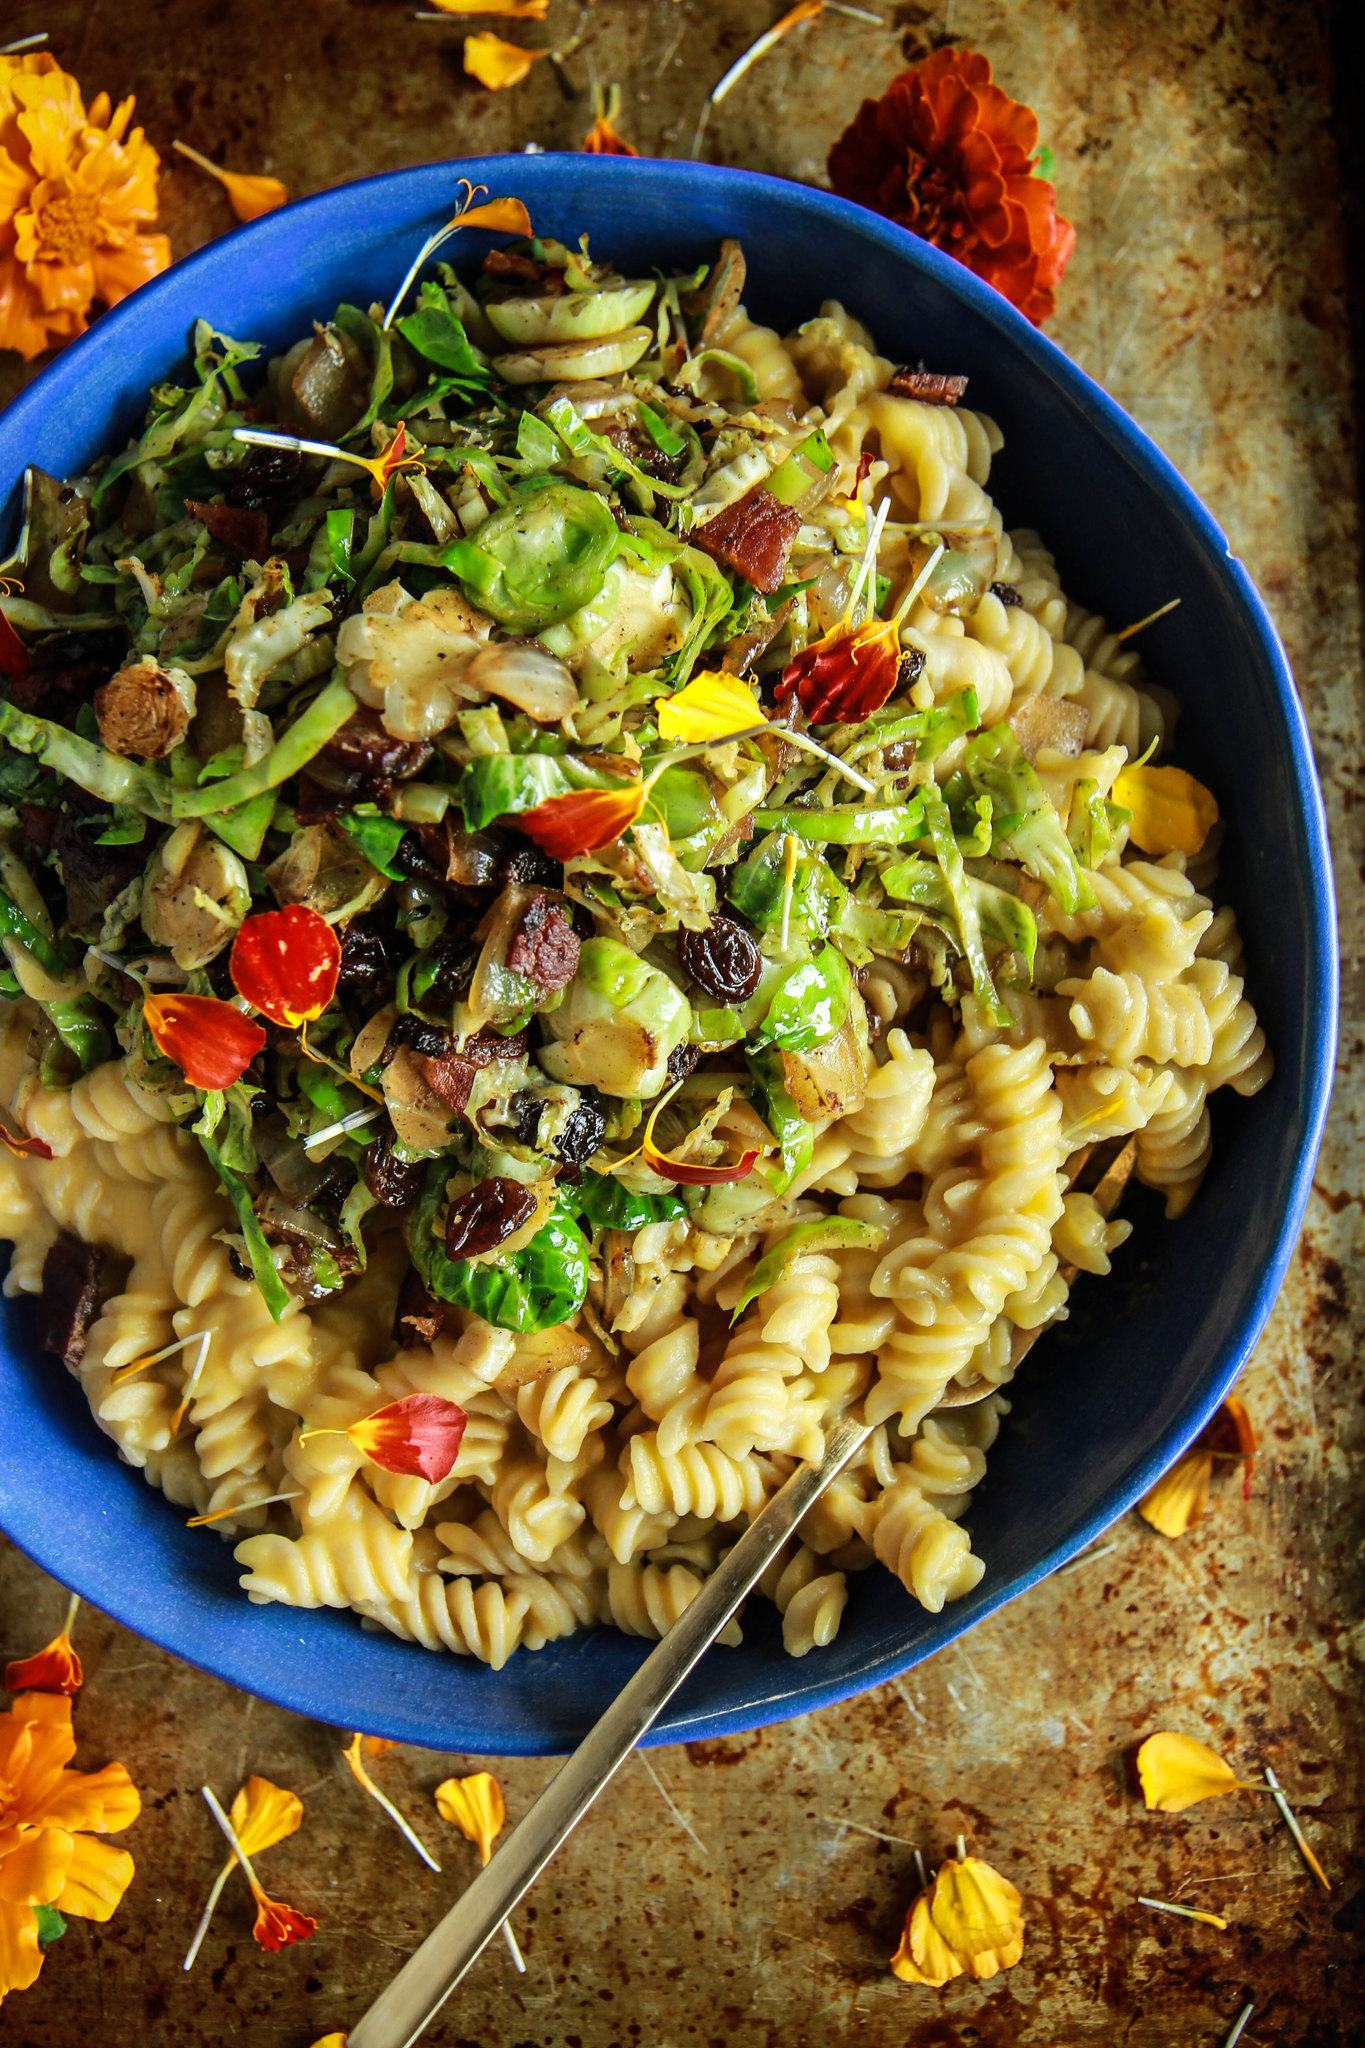 Creamy Butternut Squash Pasta with Shredded Brussles Sprouts, Bacon and Raisins